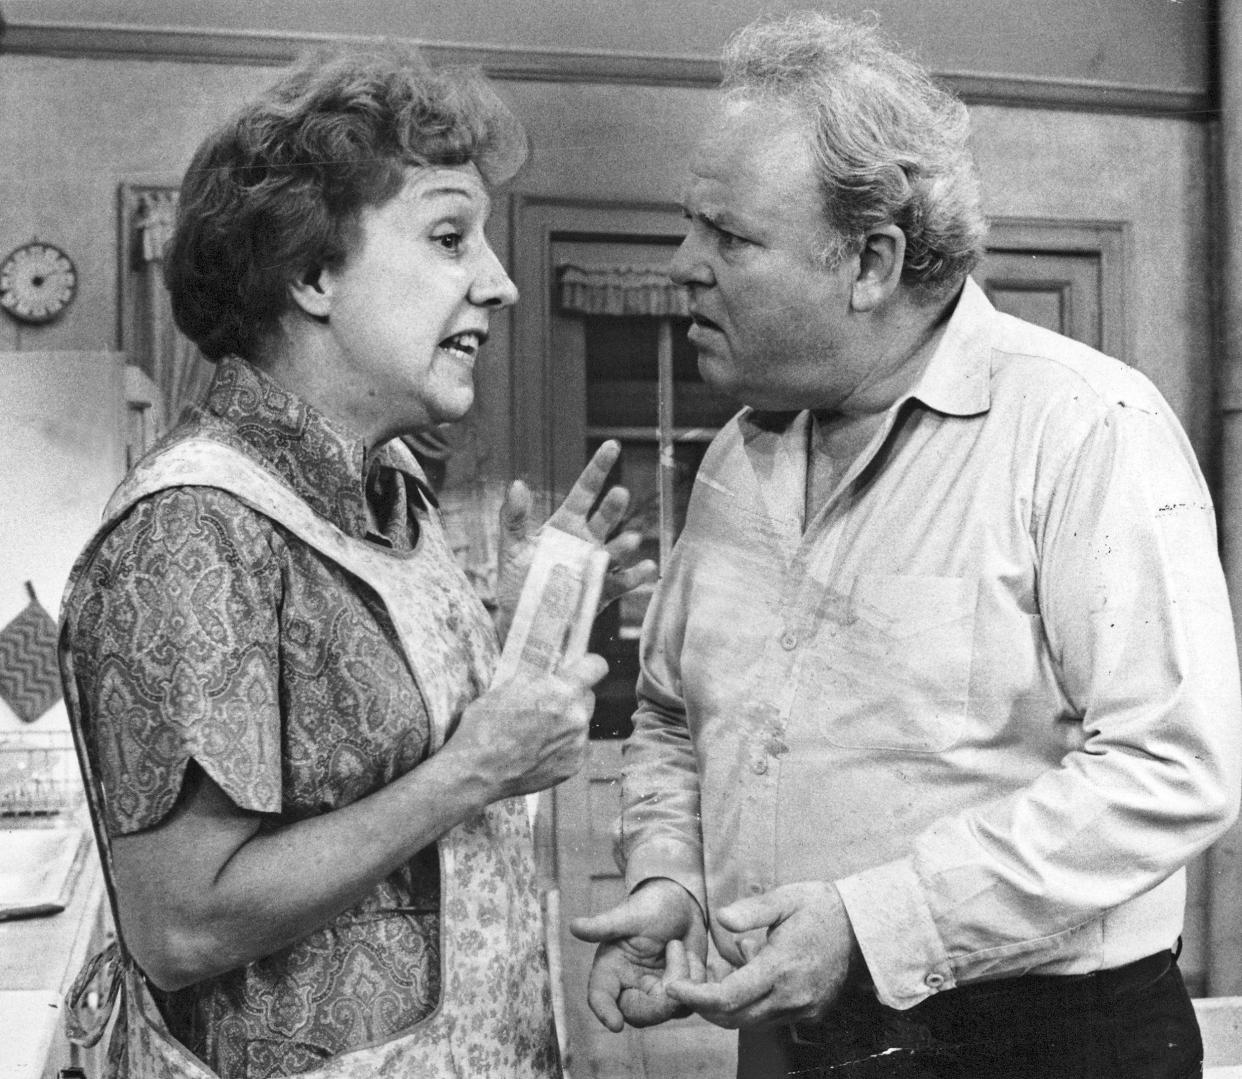 Jean Stapleton and Carroll O'Connor in "All in the Family." Stapleton's character, Edith Bunker, was killed off in the first episode of "All in the Family" spin-off "Archie Bunker's Place."